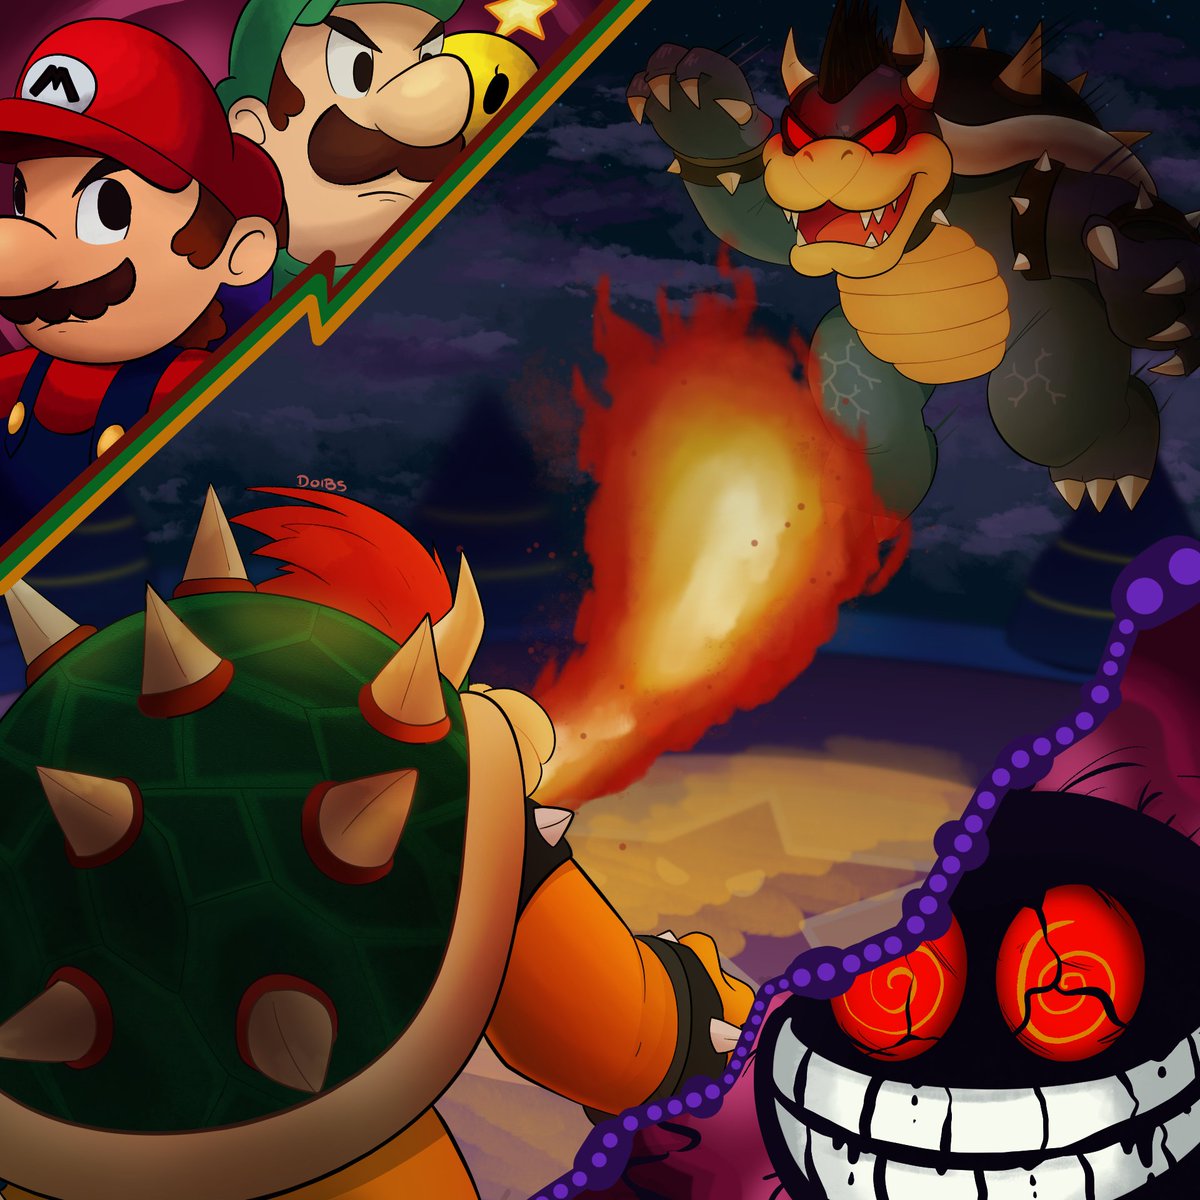 dal Tablet Acquiesce Ethan ☁️ Commissions OPEN! on Twitter: "I drew the final battle of Mario  and Luigi Bowser's Inside Story! 🔥🔥 What game's final boss should I draw  next? #SuperMario #nintendo #nintendoswitch #fanart  https://t.co/6UaPYOSJUE" /